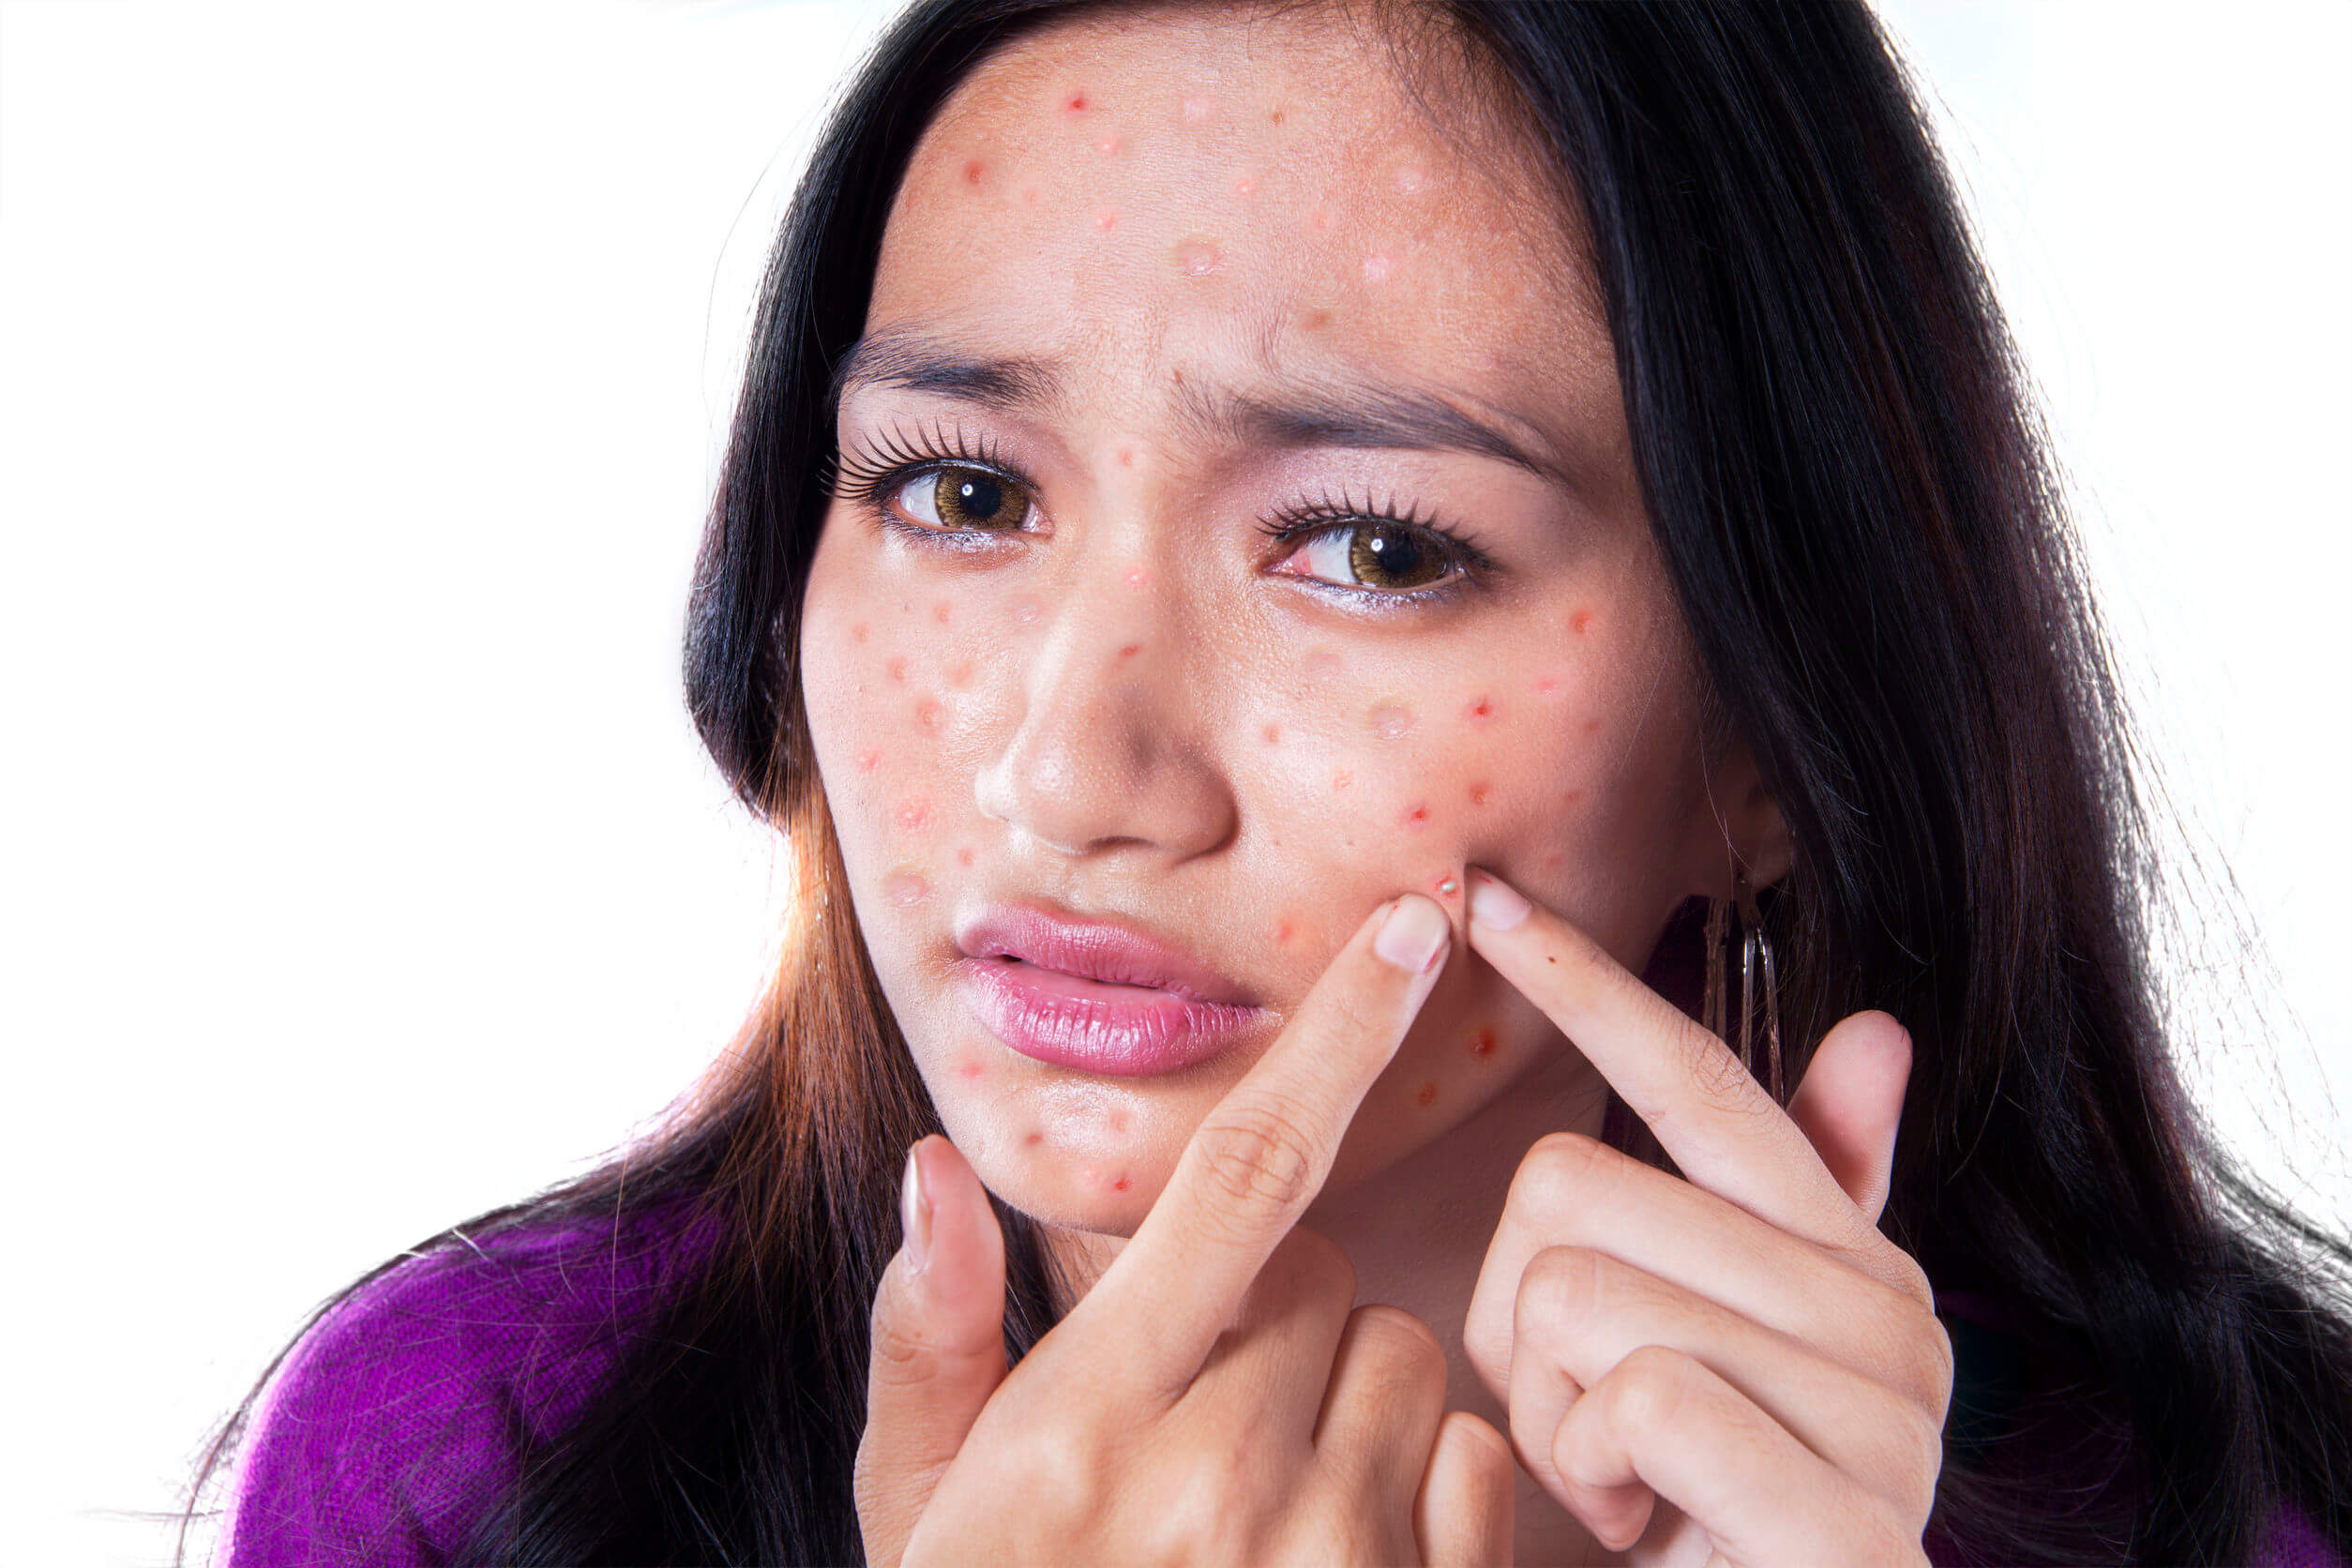 Pimples on the face can be very annoying.